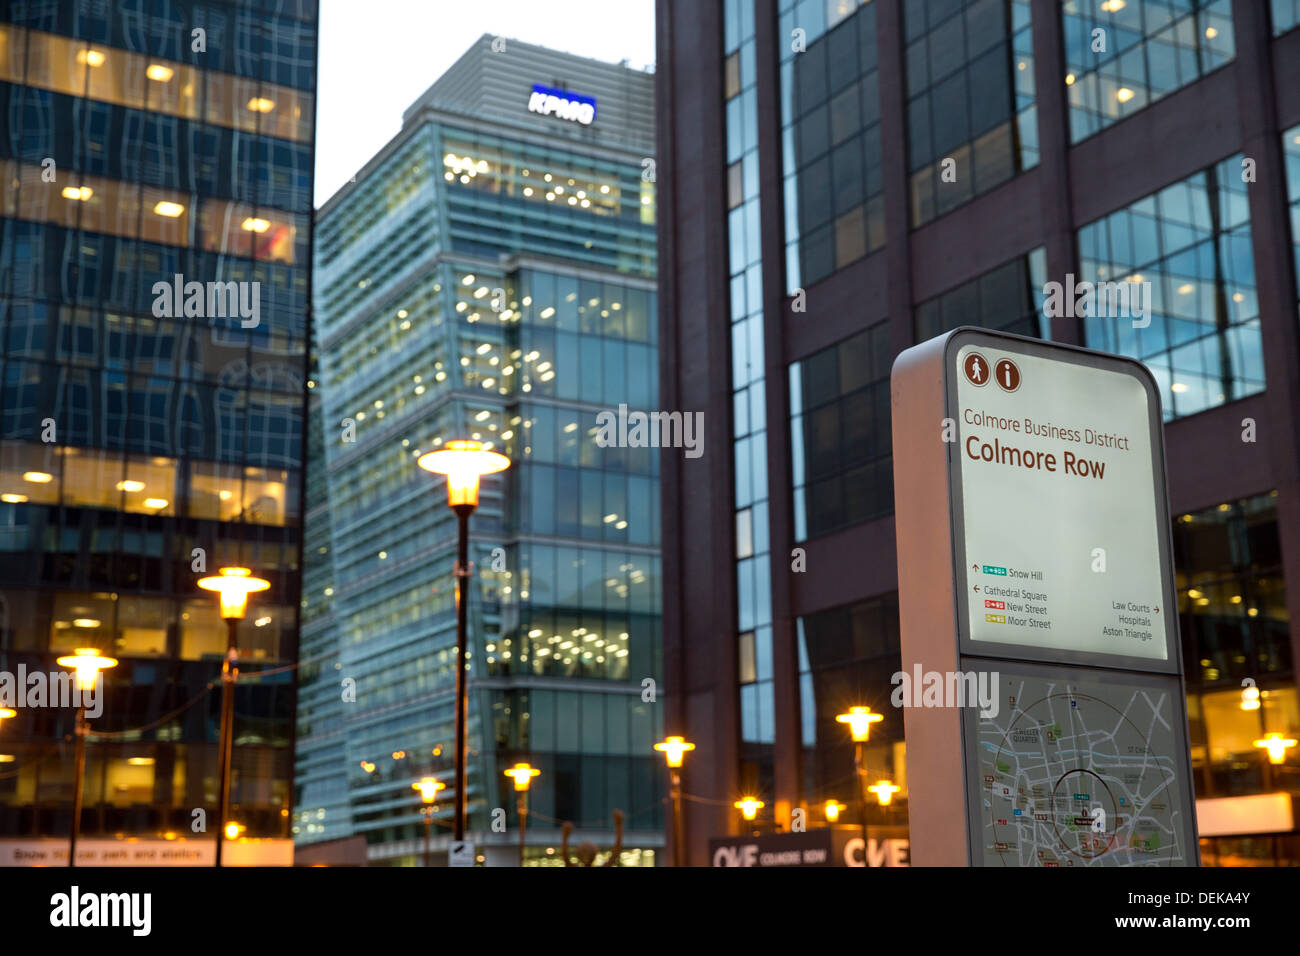 The courtyard outside the entrance to Snowhill train station where a number of large businesses are based. Stock Photo